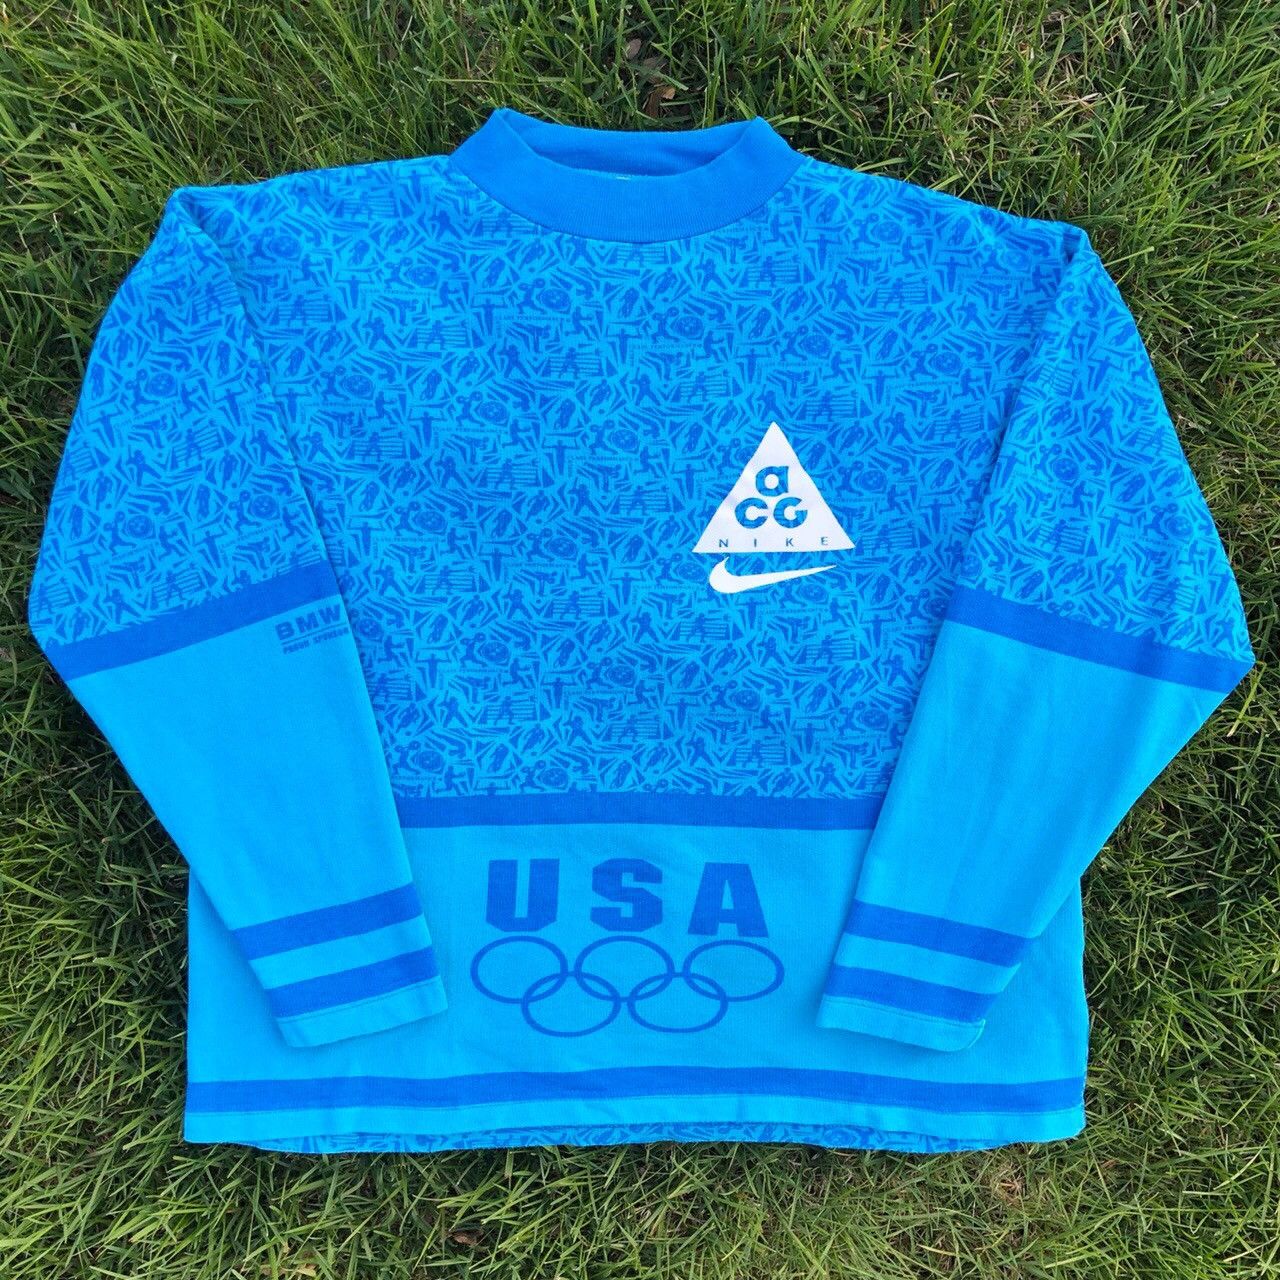 Vintage VTG BMW Nike ACG USA Olympics Long Sleeve Rare Made in USA Size US M / EU 48-50 / 2 - 1 Preview